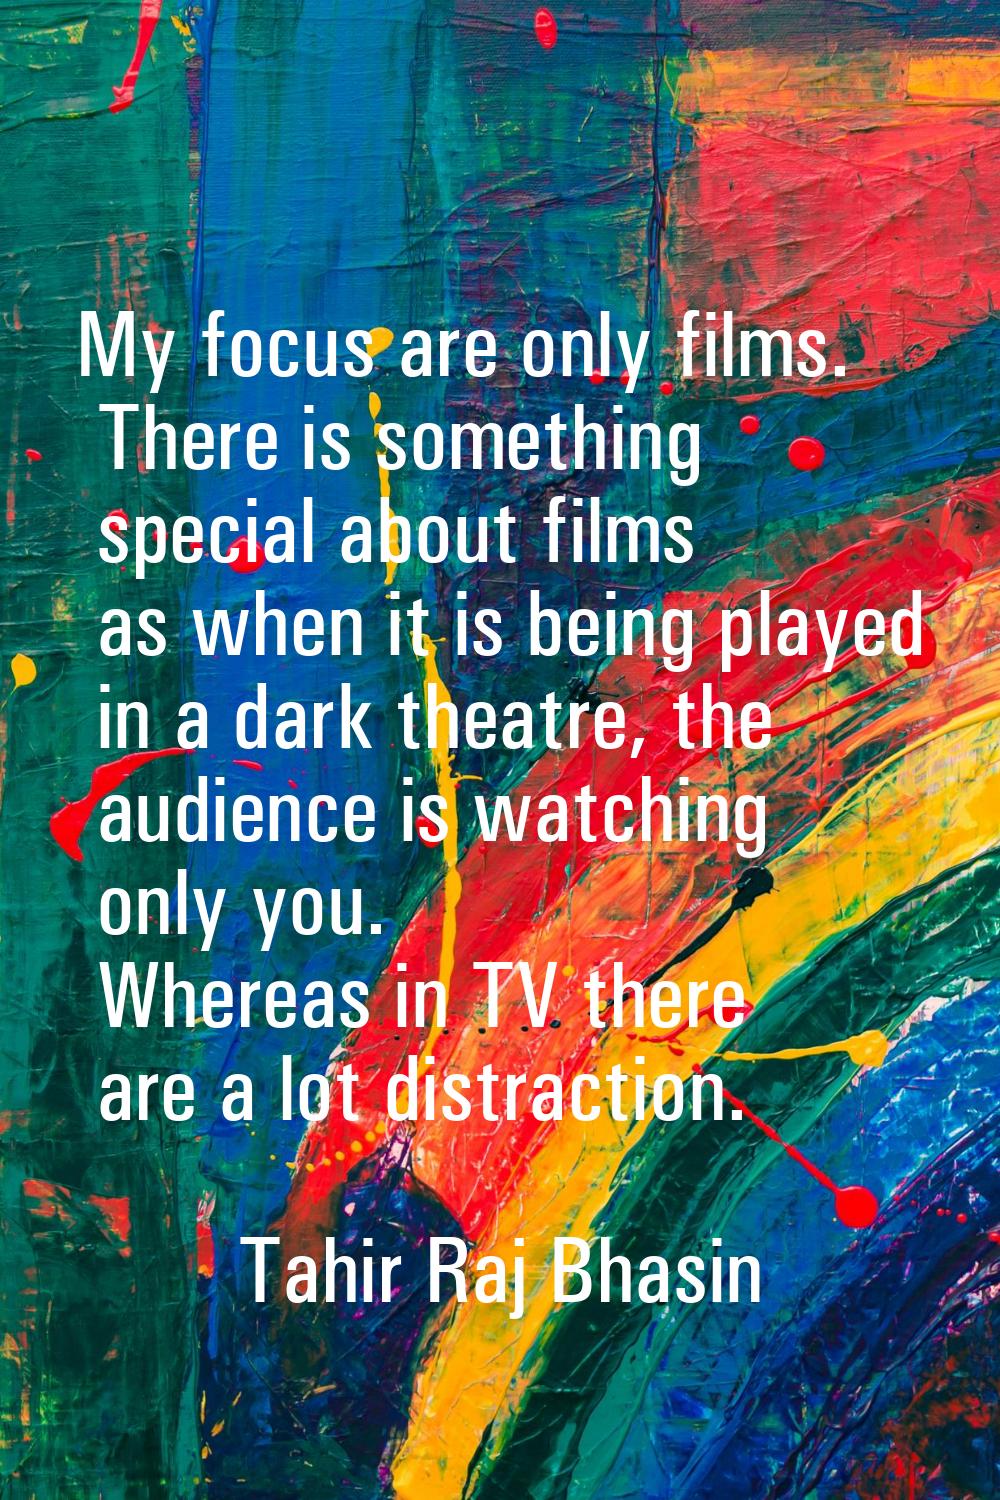 My focus are only films. There is something special about films as when it is being played in a dar